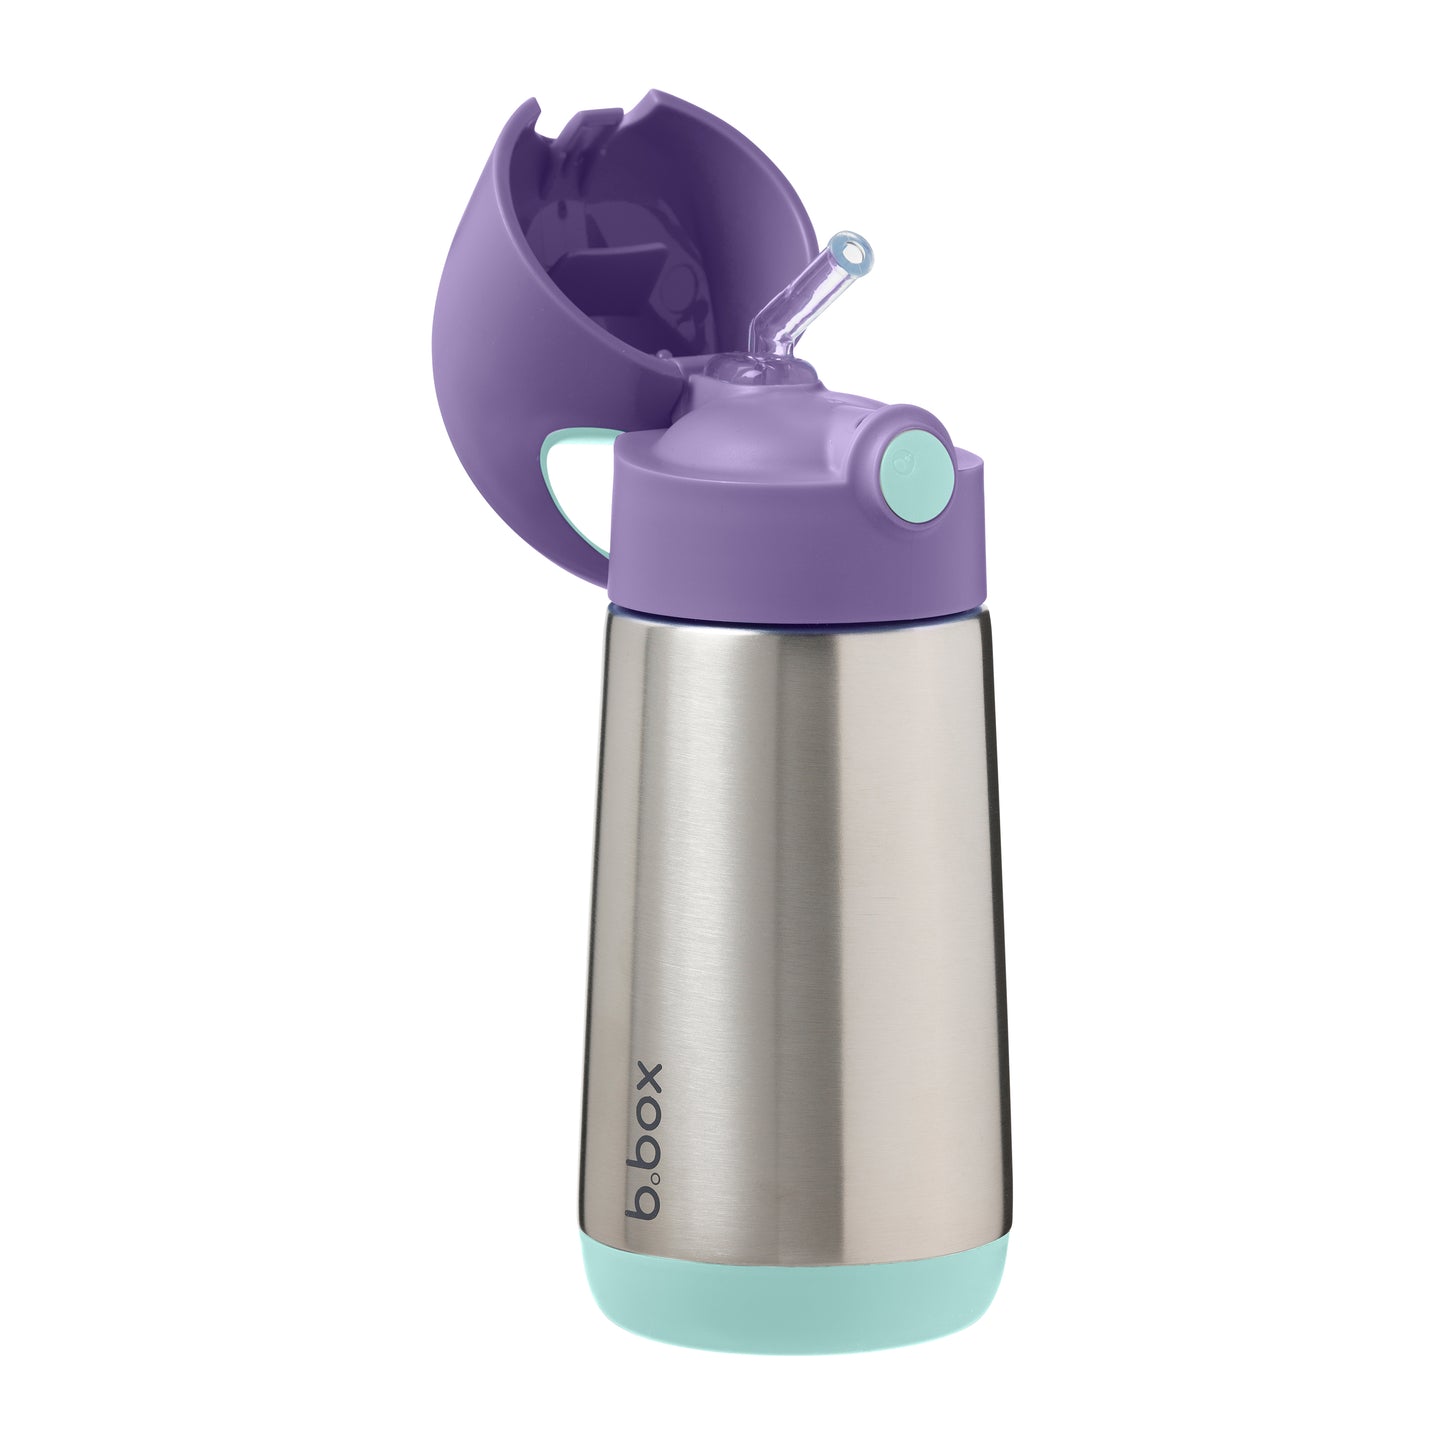 350ml insulated drink bottle - Lilac Pop